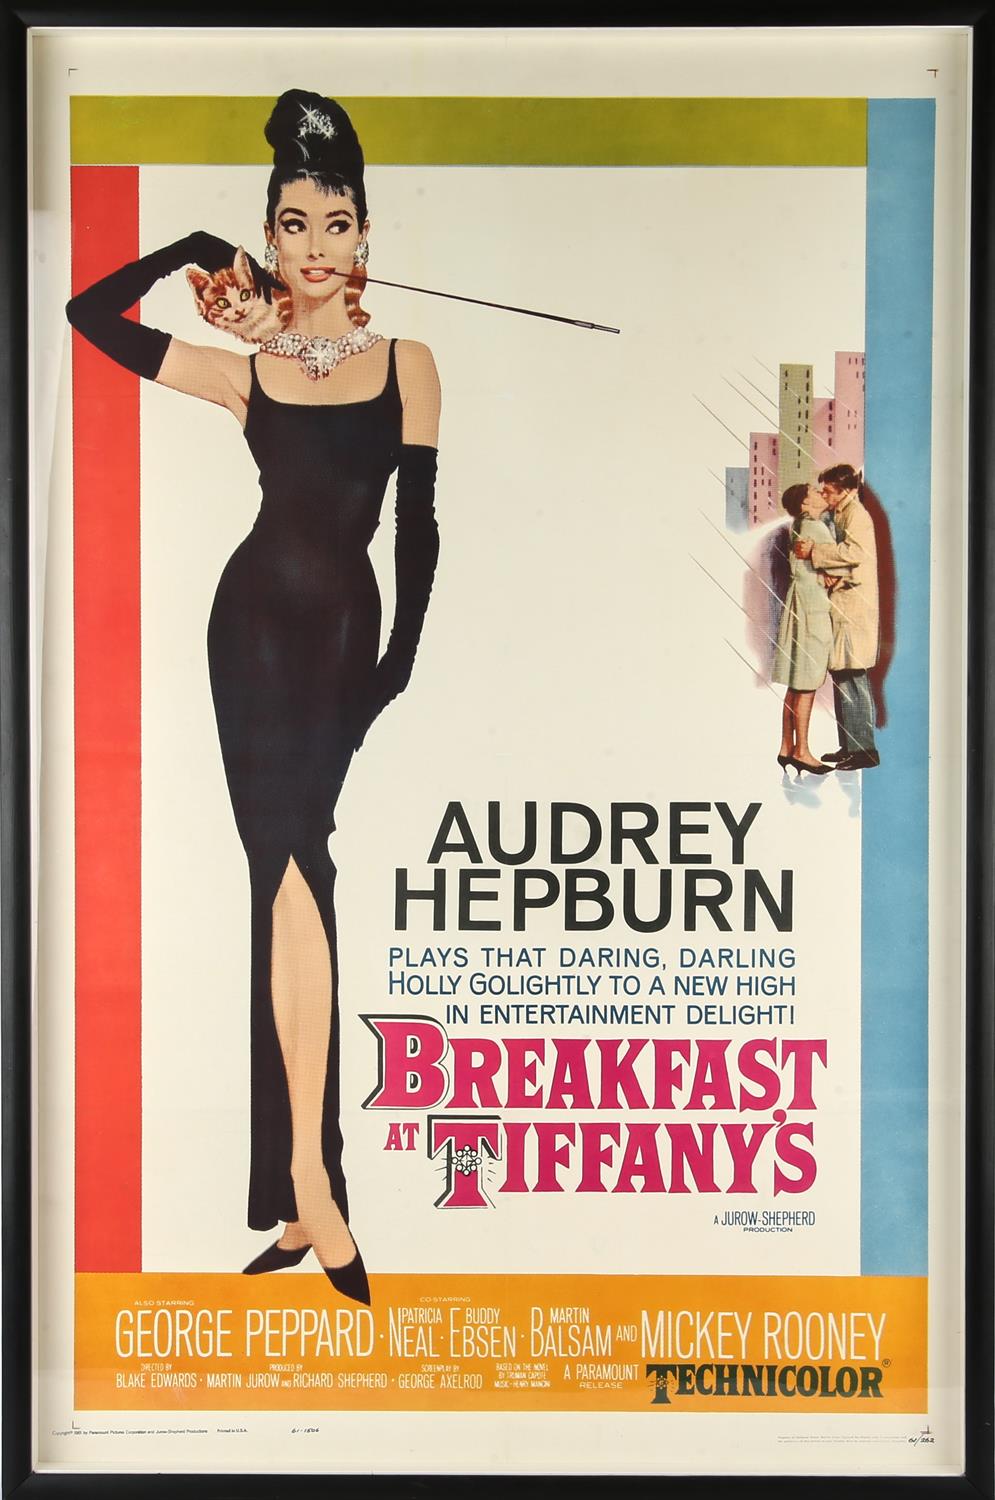 Breakfast at Tiffany's (1961) US One sheet film poster, starring Audrey Hepburn and with artwork by